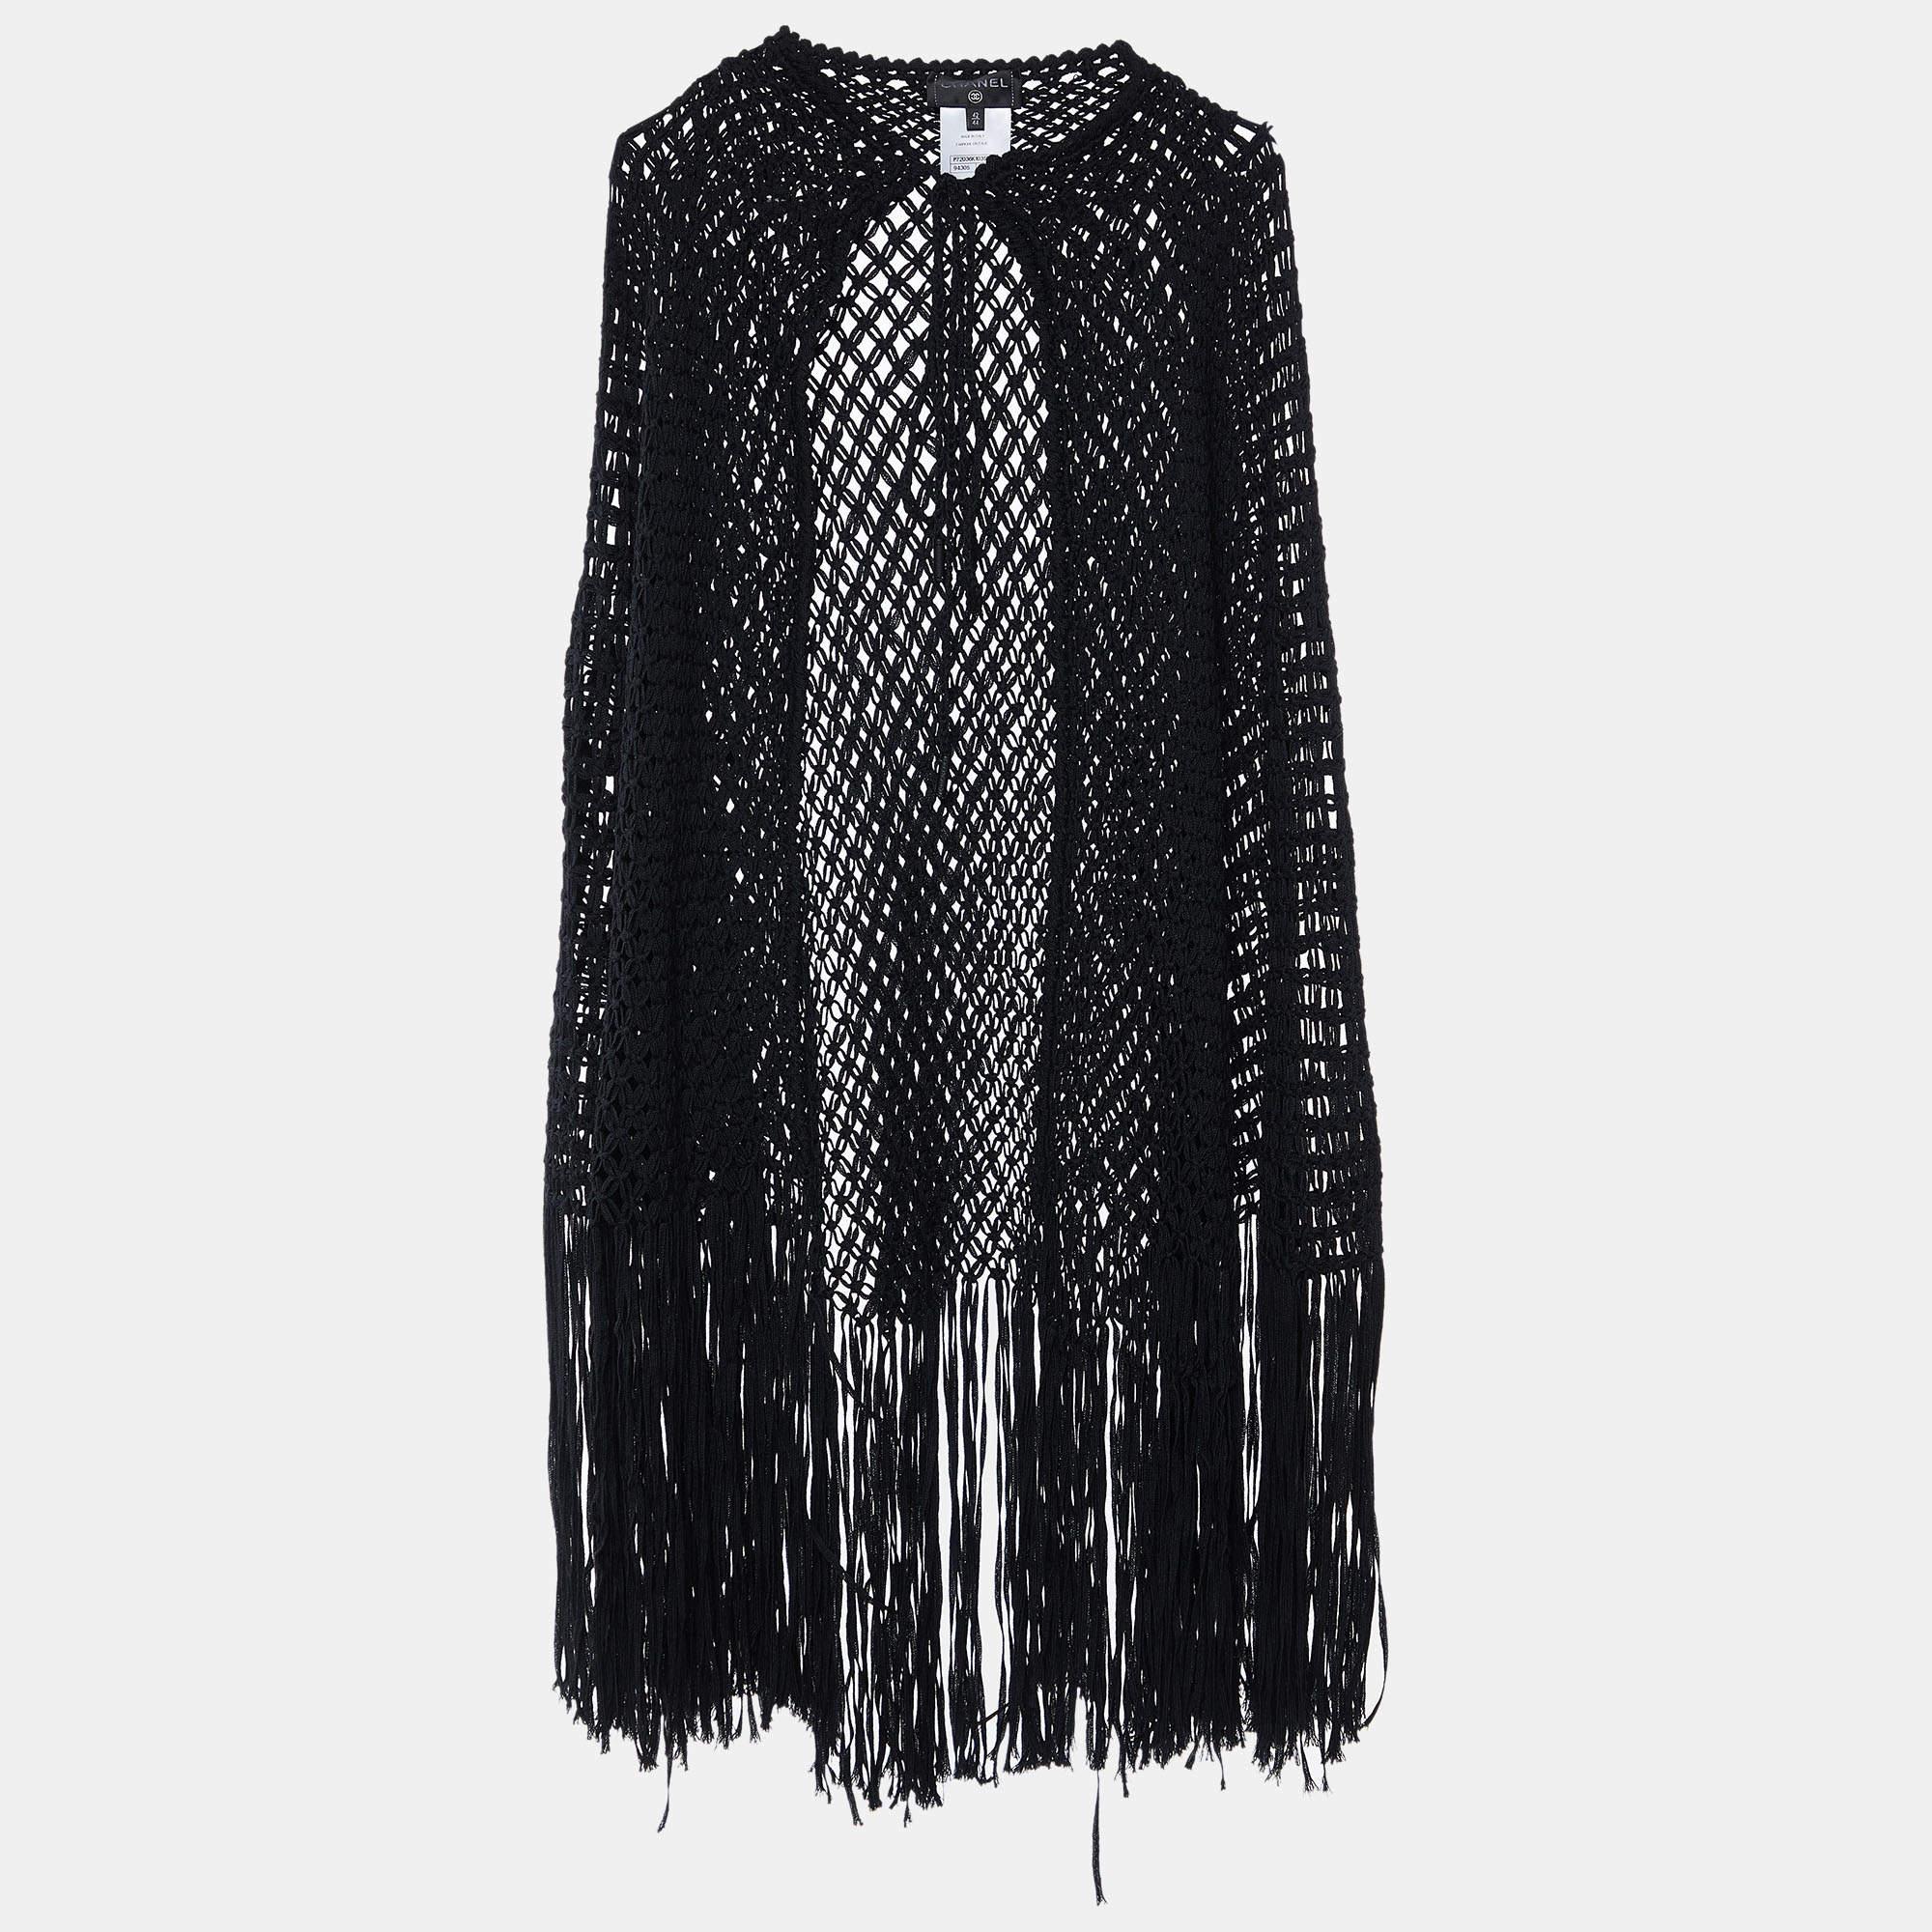 Experience timeless allure with the Chanel cape. Crafted with meticulous attention to detail, this exquisite piece exudes sophistication and refinement. The intricate open braid design and delicate fringe accents add a touch of understated luxury to